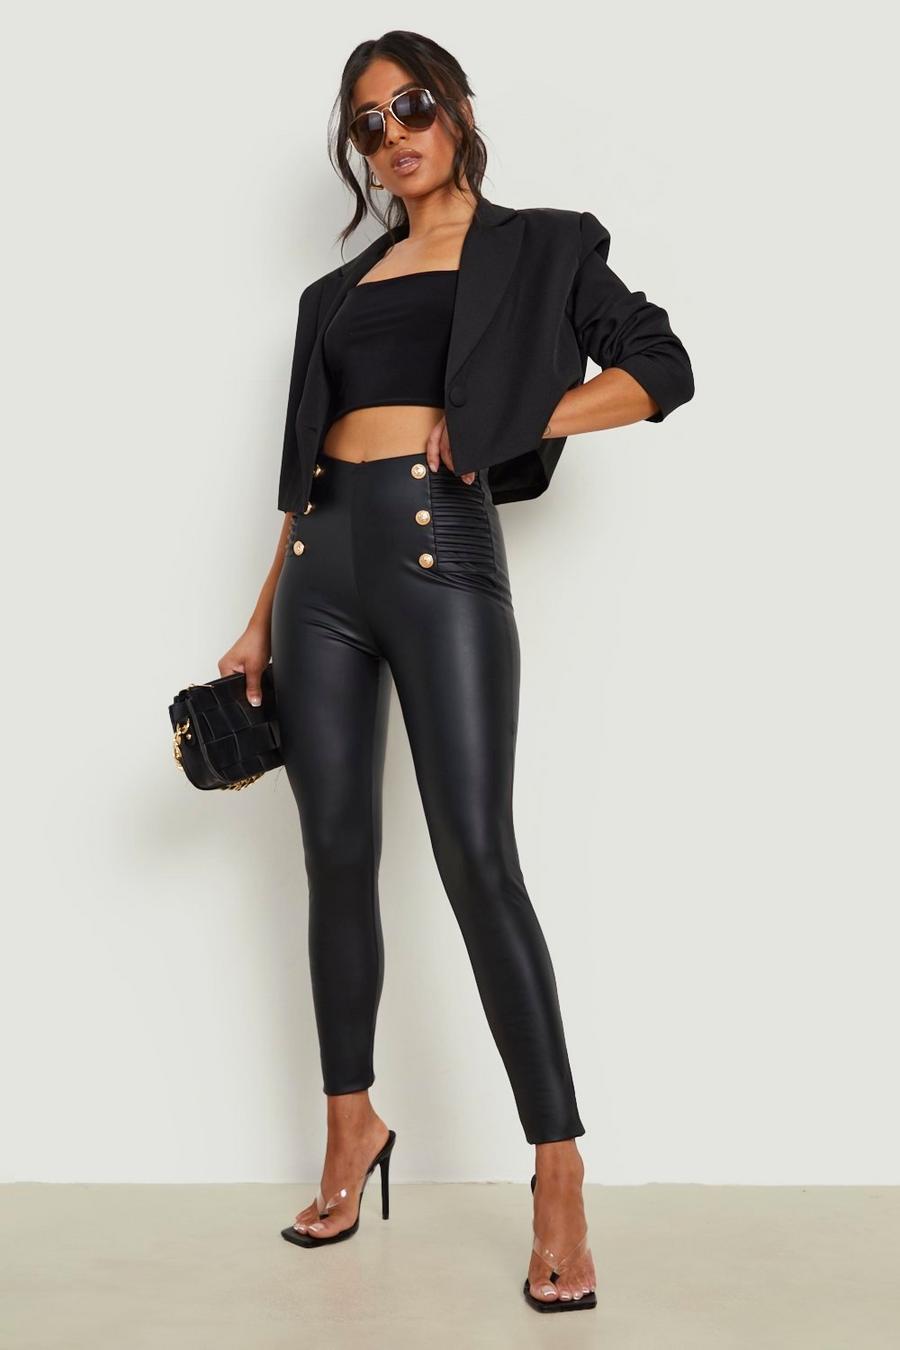 Topshop Tall leather look leggings in black - ShopStyle